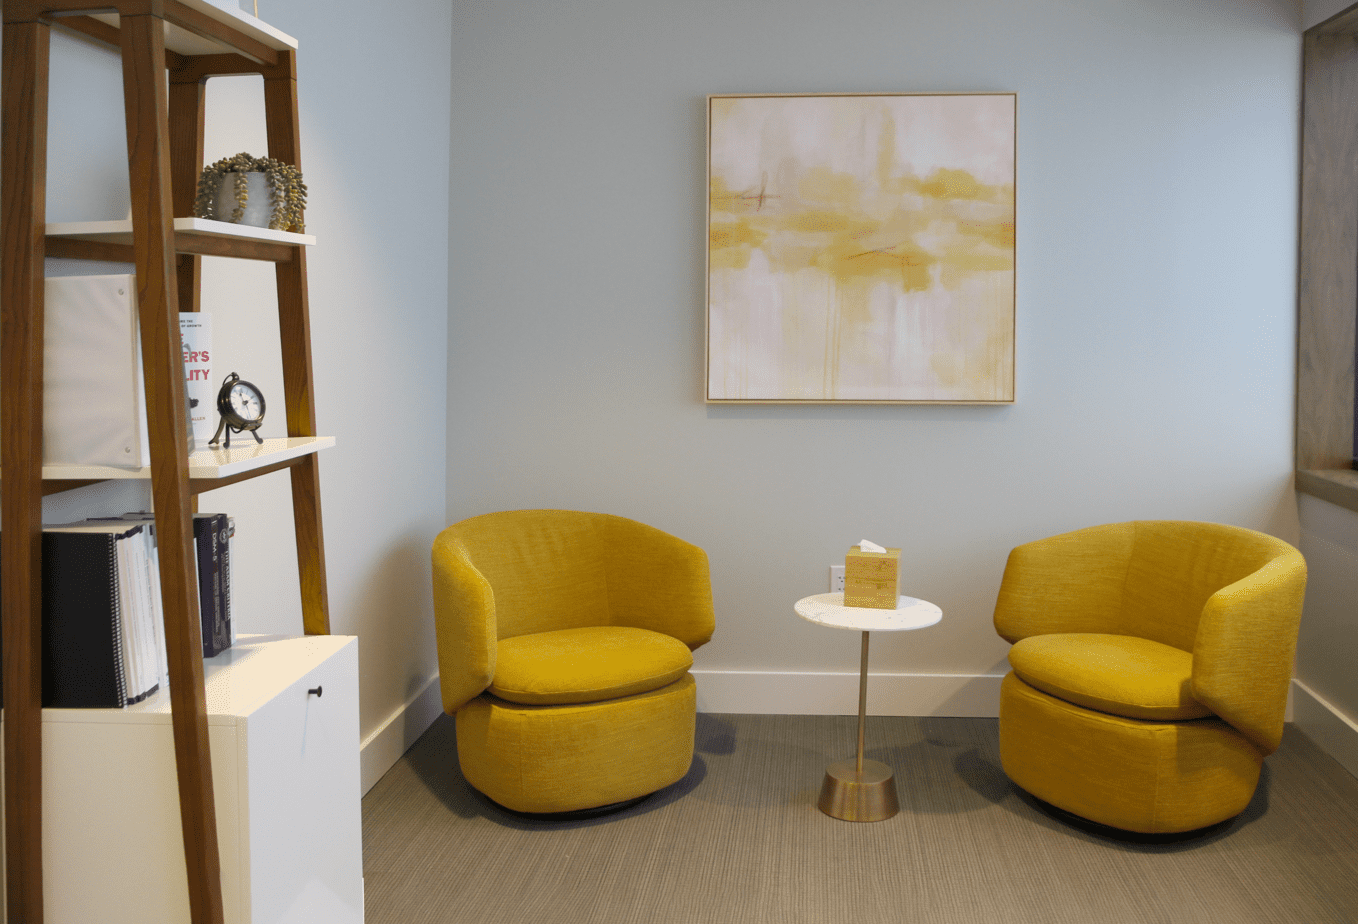 Individual counseling room with yellow chairs and aesthetic decor